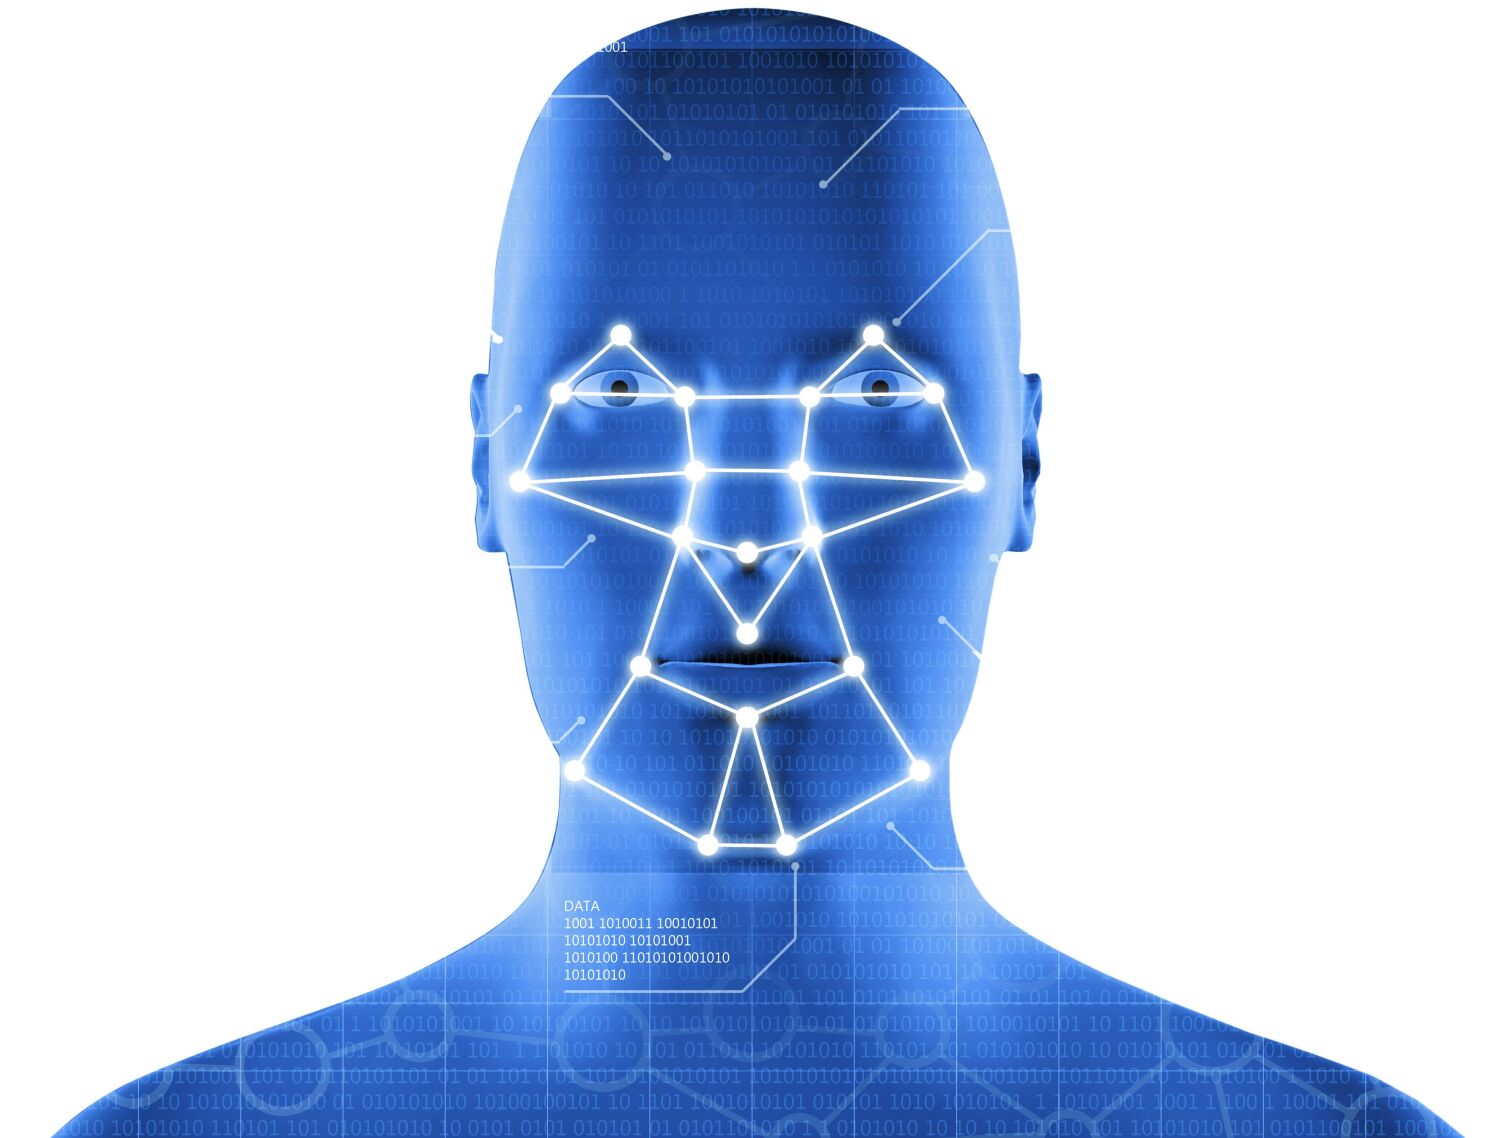 Op-Ed: Facial recognition technology victimizes people of color. It must be regulated